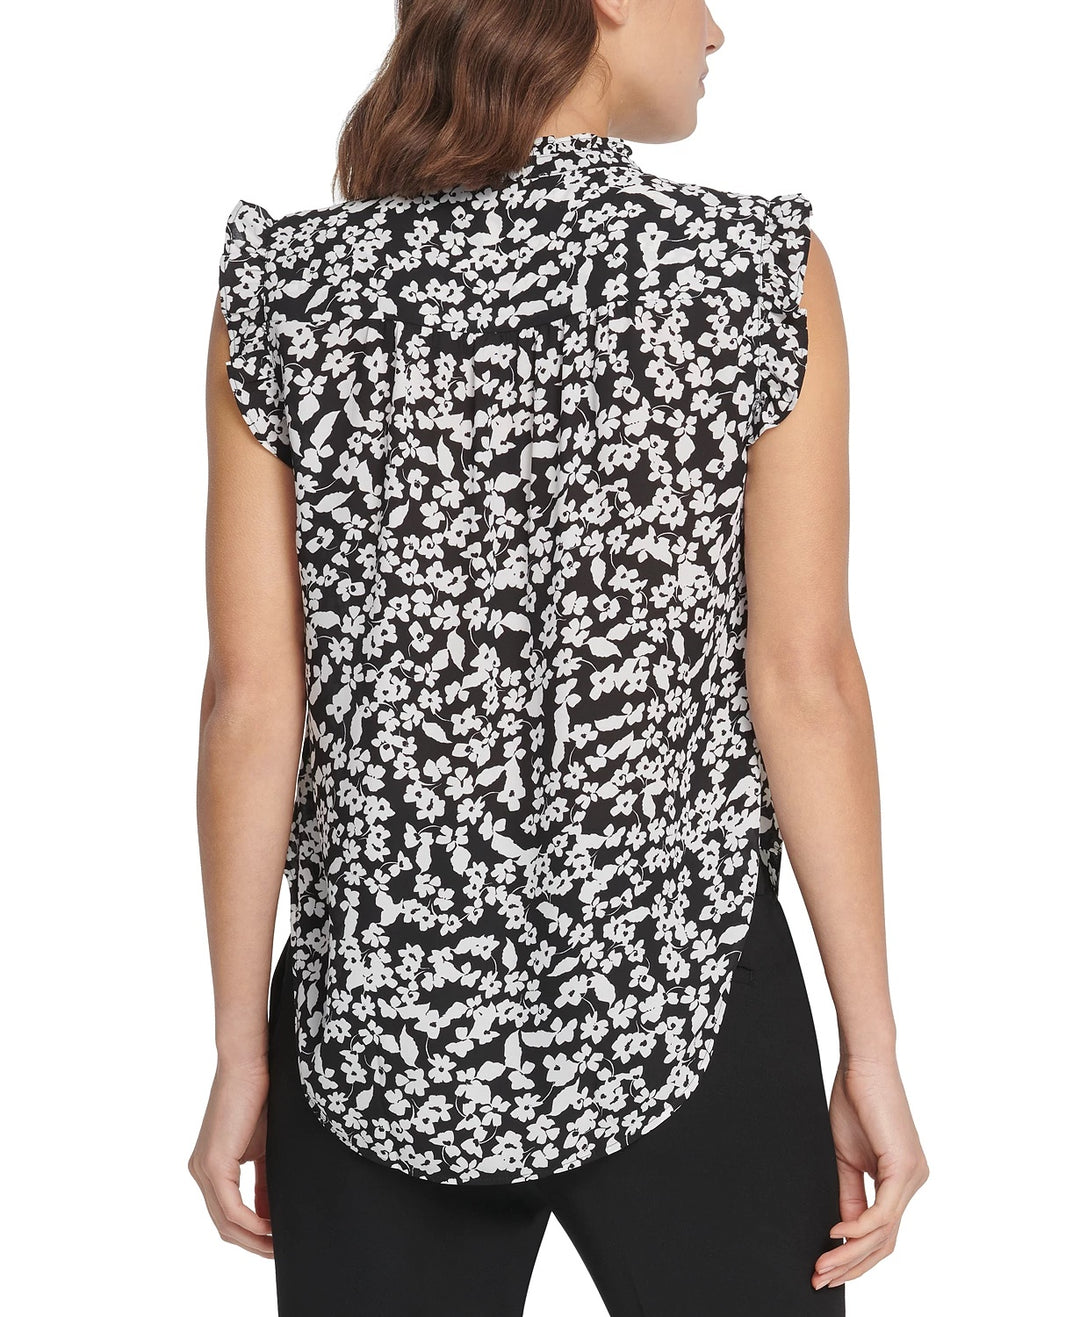 DKNY Women's Floral Print Sleeveless Ruffle Top Charcoal Size Large